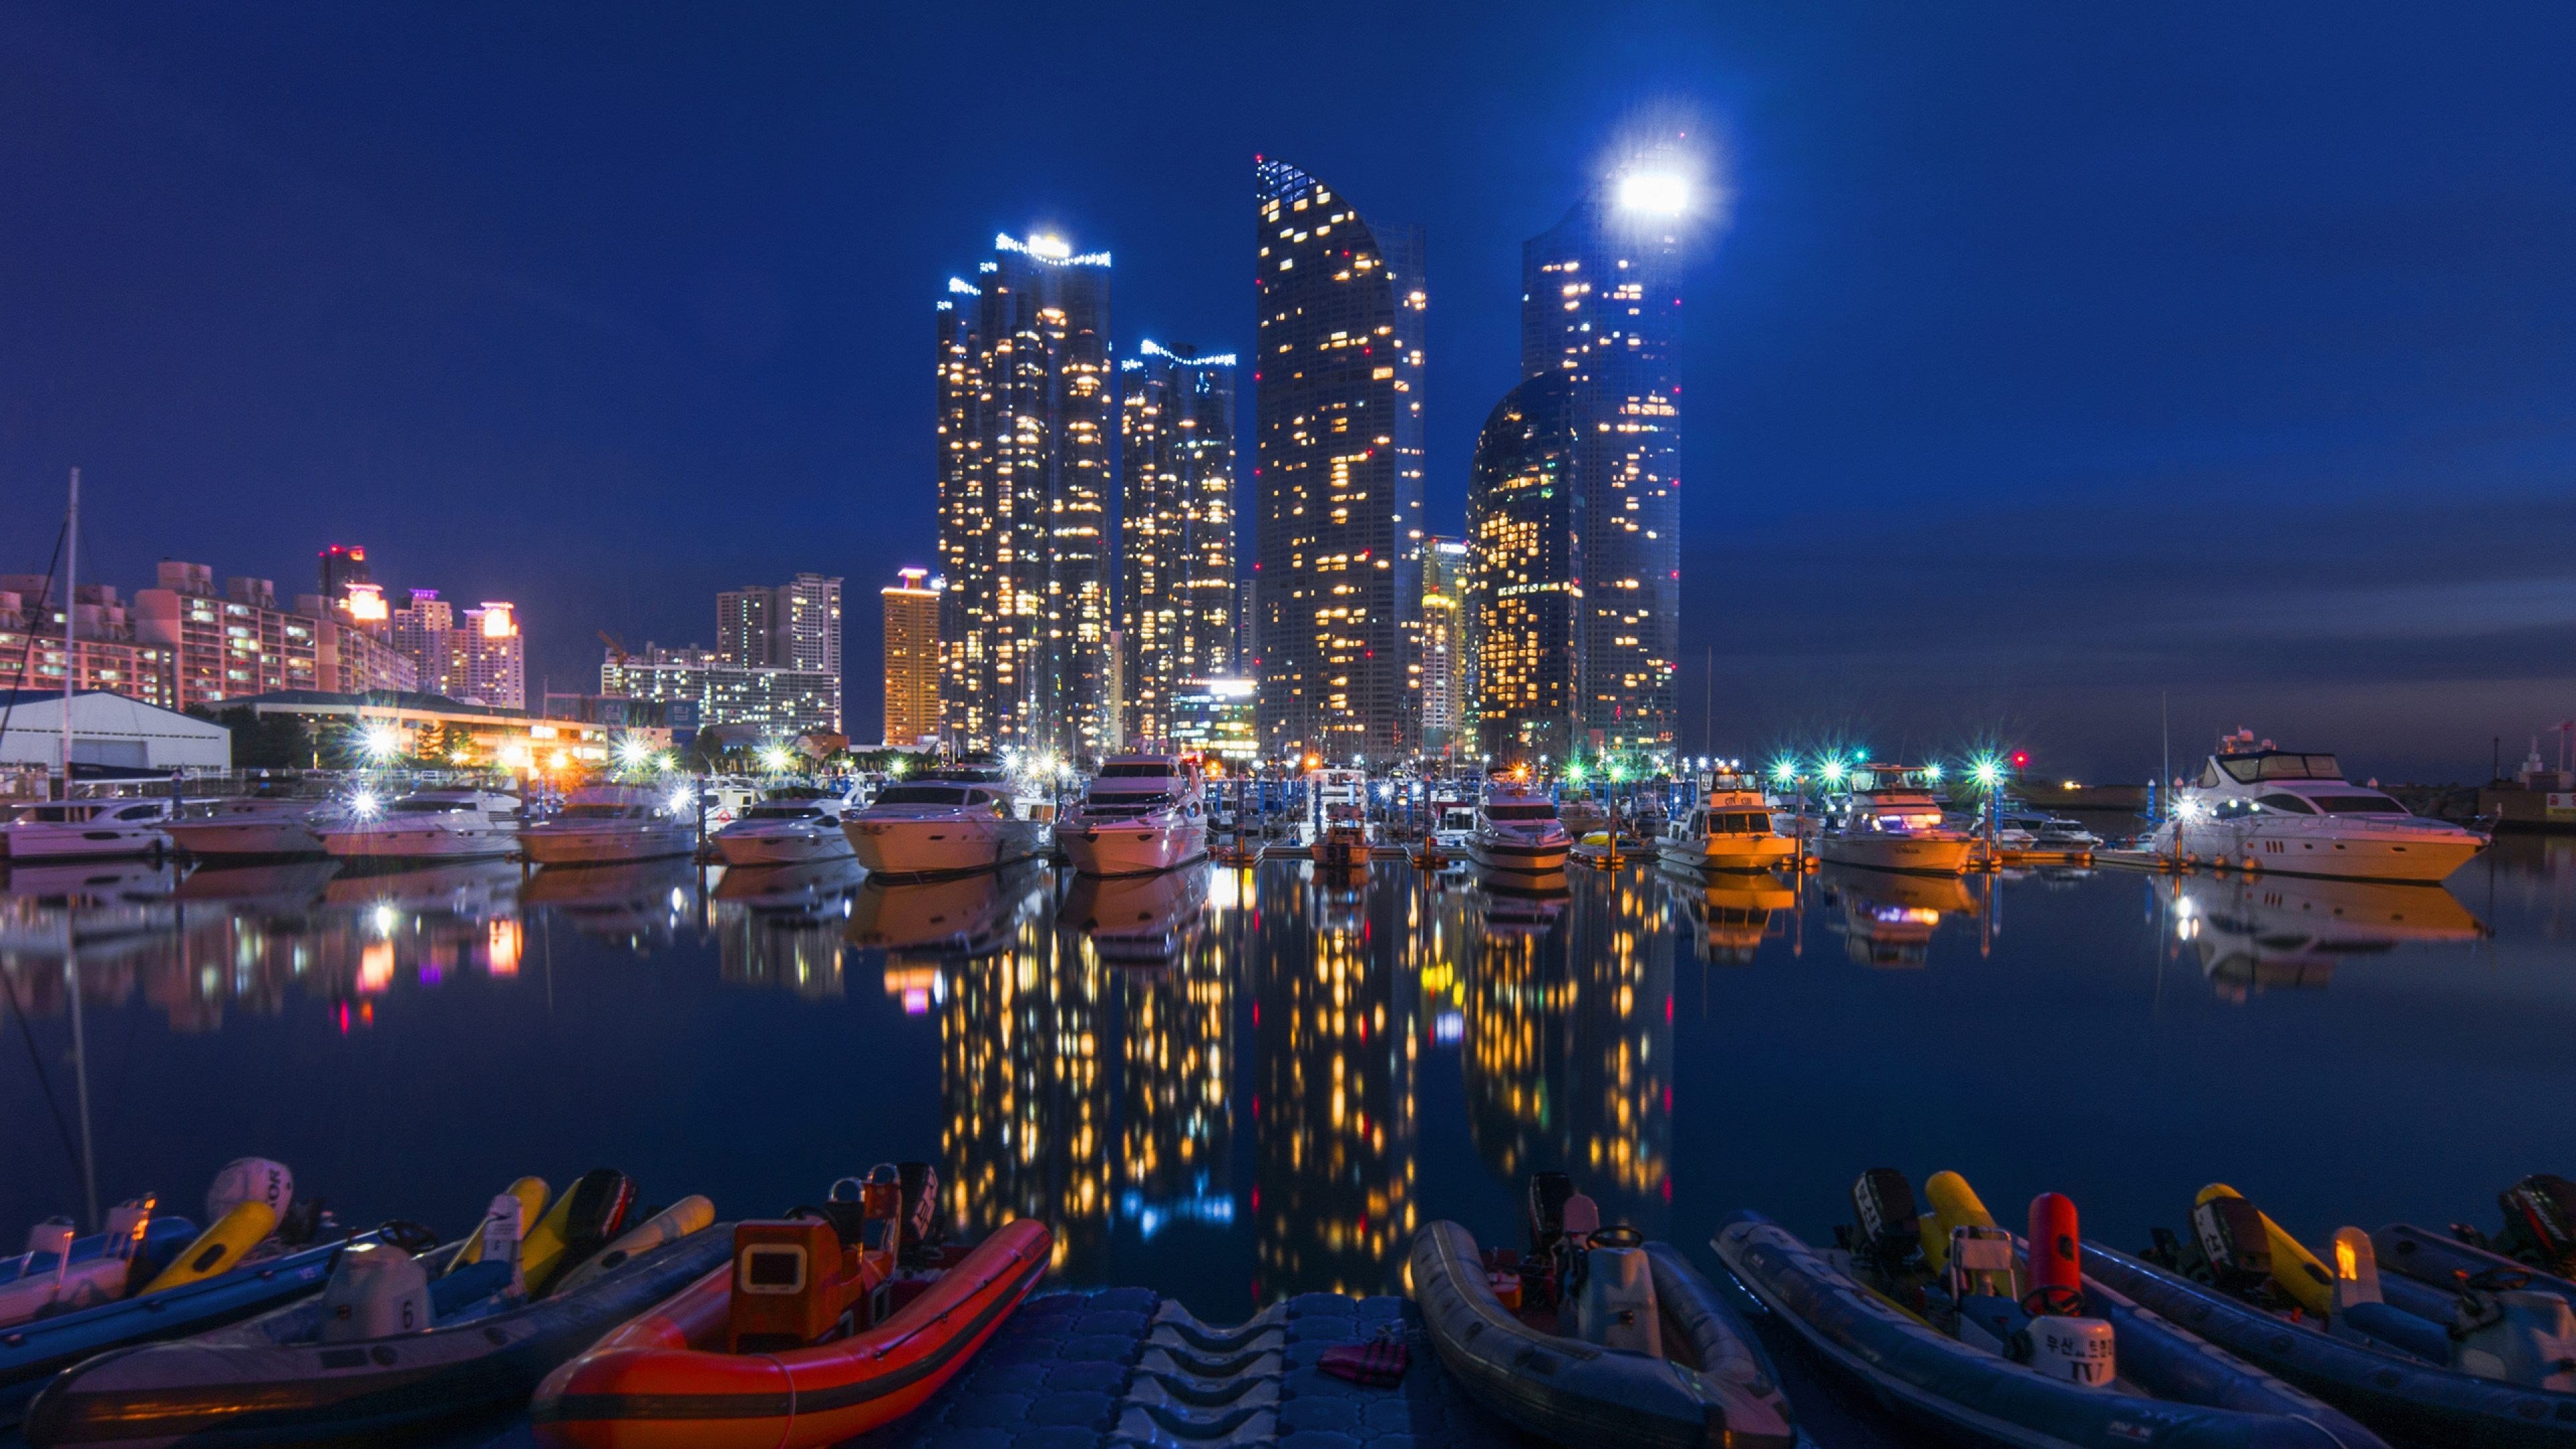 night city buildings and boats 4k ultra HD wallpaper High quality walls